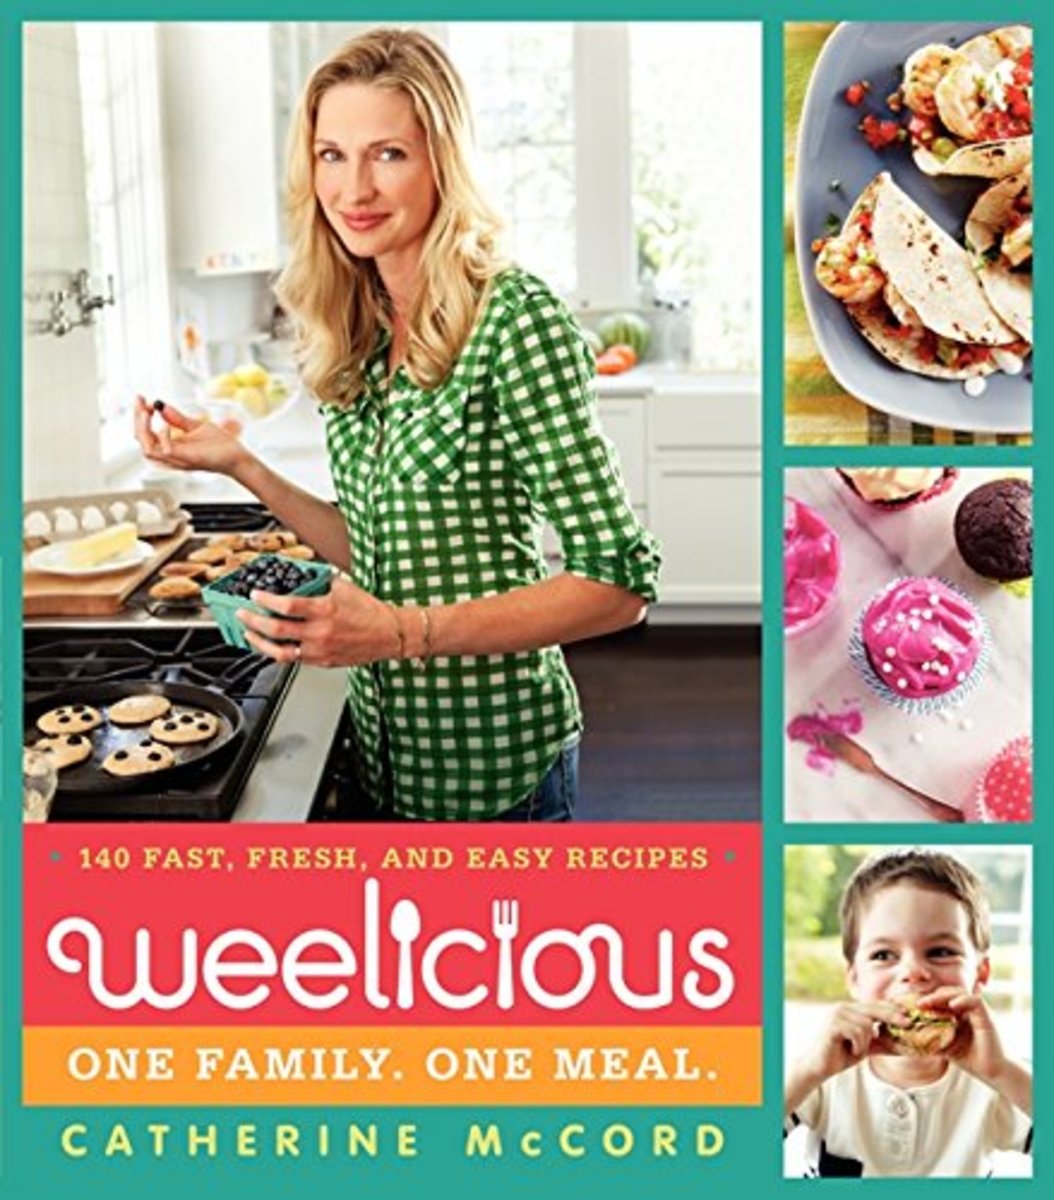 Weelicious: One Family. One Meal